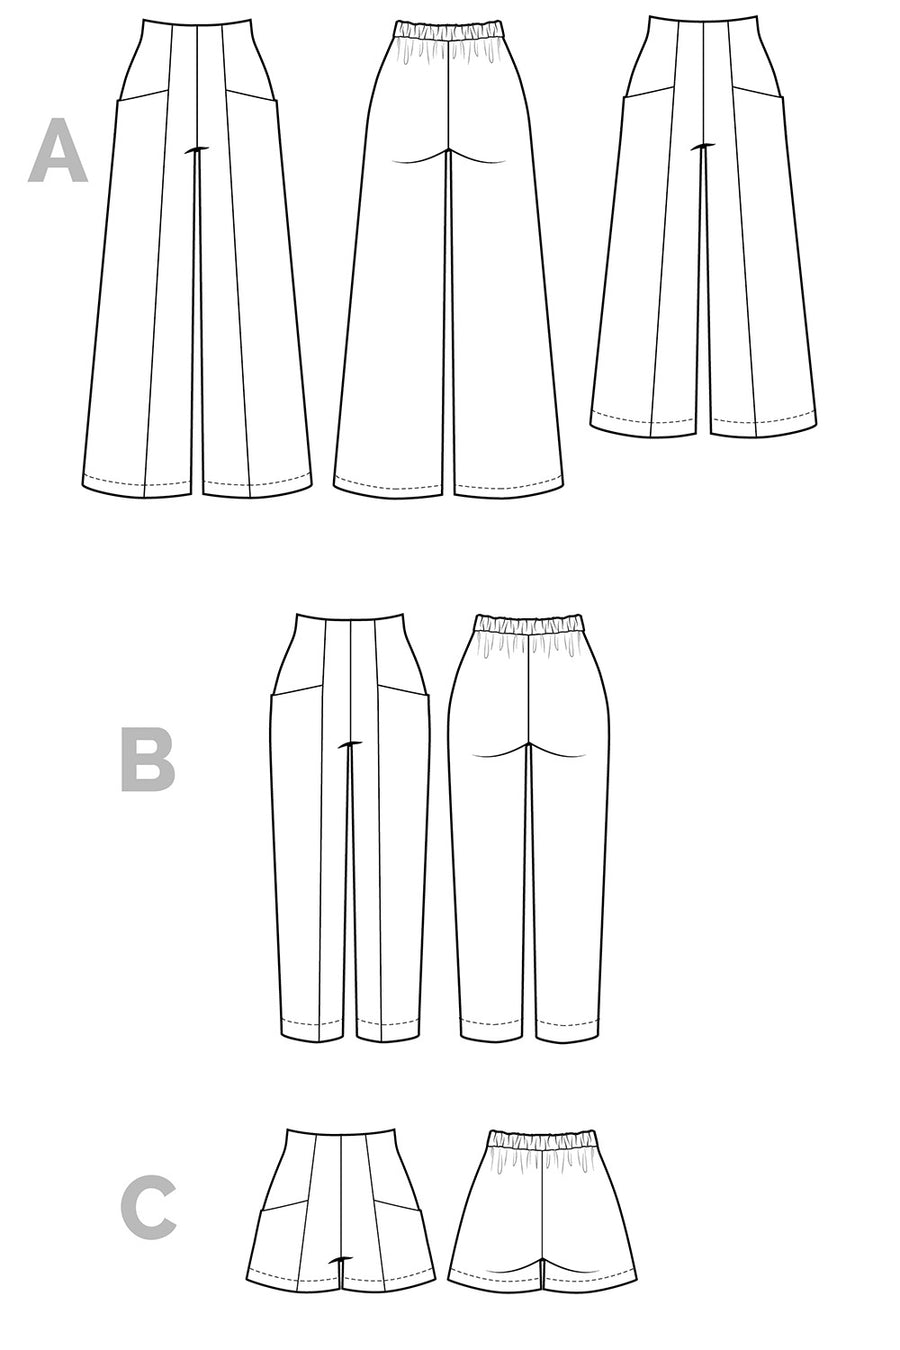 How To Make a Short Pant Pattern/Easy Pattern Drafting Tutorial/Beginners  Friendly Tutorial. 